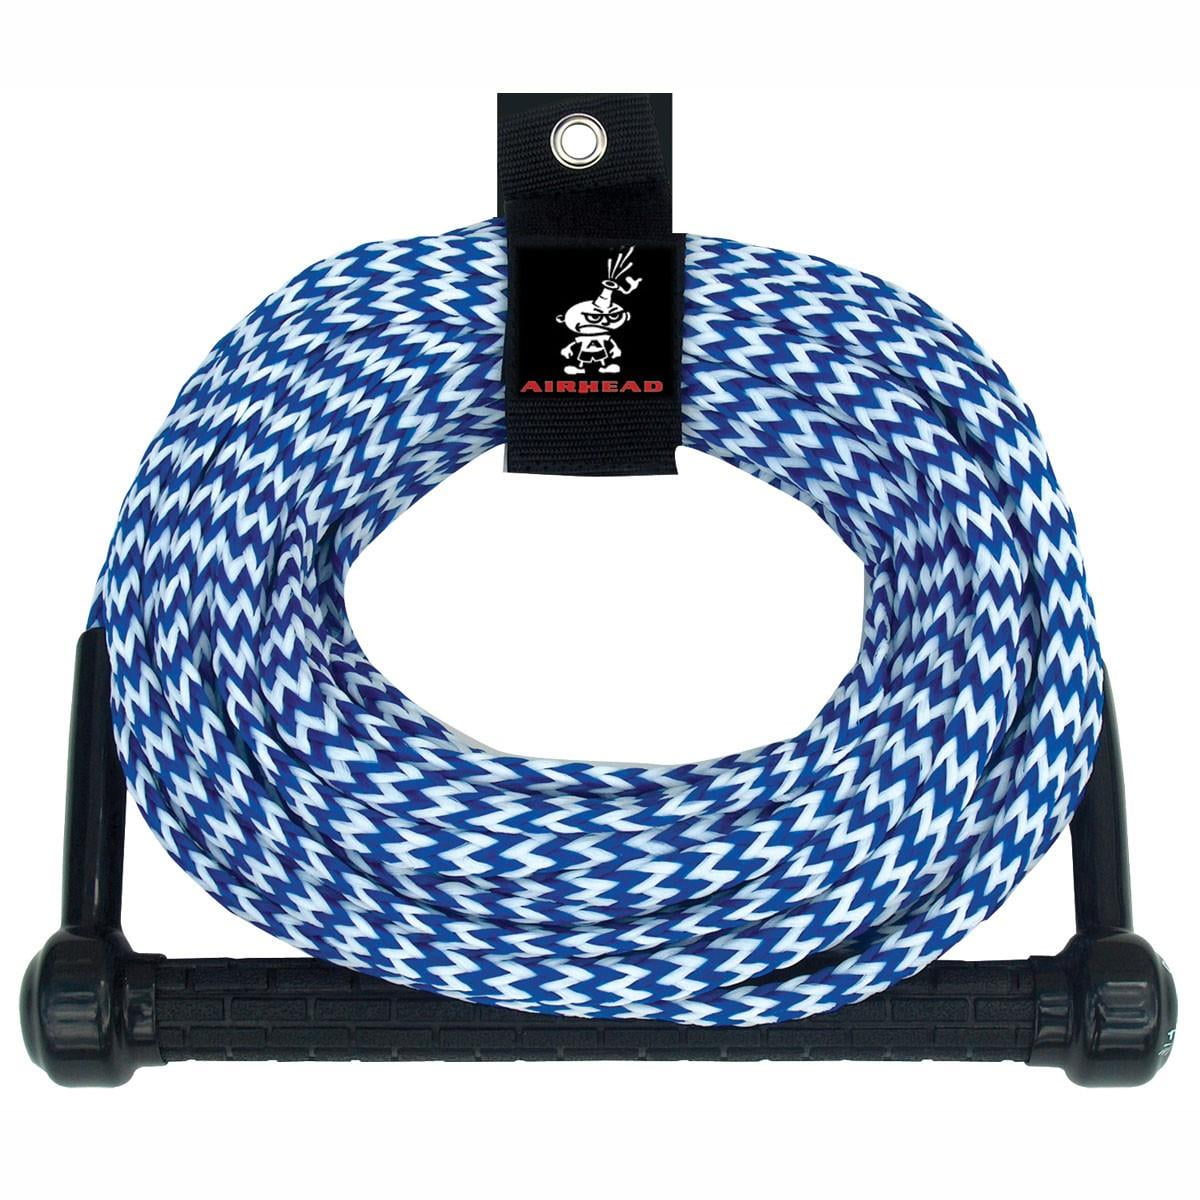 SEACHOICE Self Centering Tow Harness Demon Tubing 12' Float Repl AHTH-5 86754 